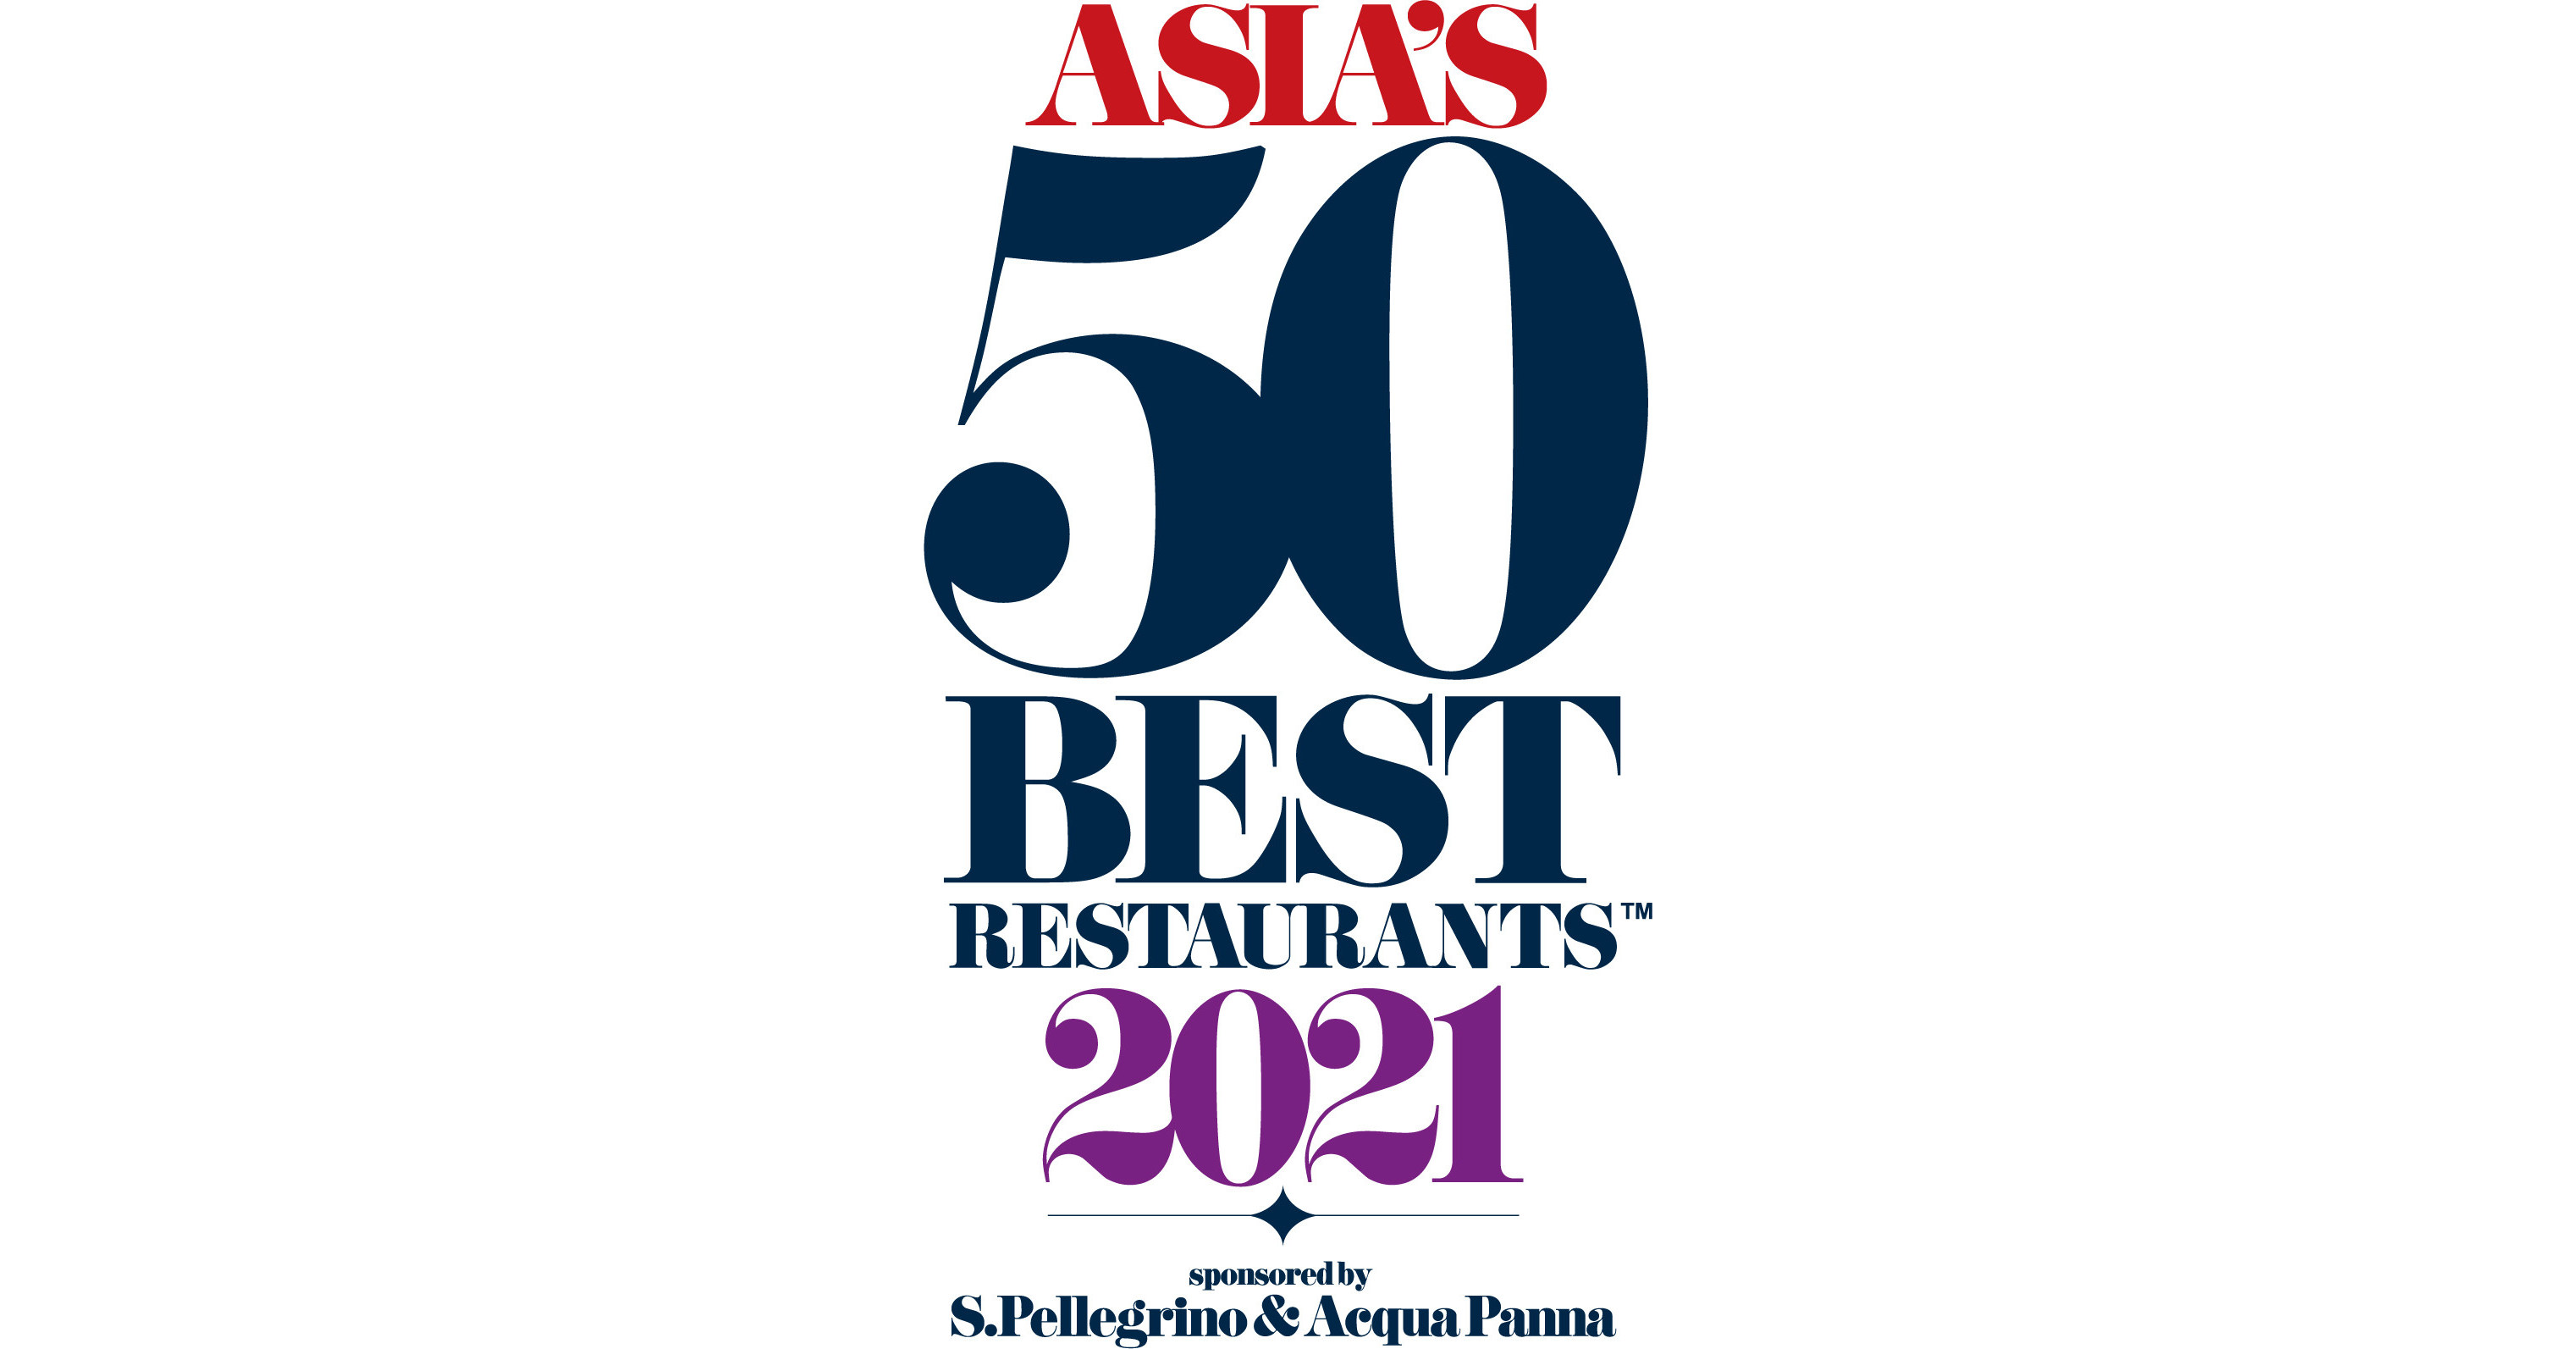 Entreprenør Besiddelse forvridning Asia's 50 Best Restaurants Honours Meta in Singapore with Coveted American  Express One To Watch Award